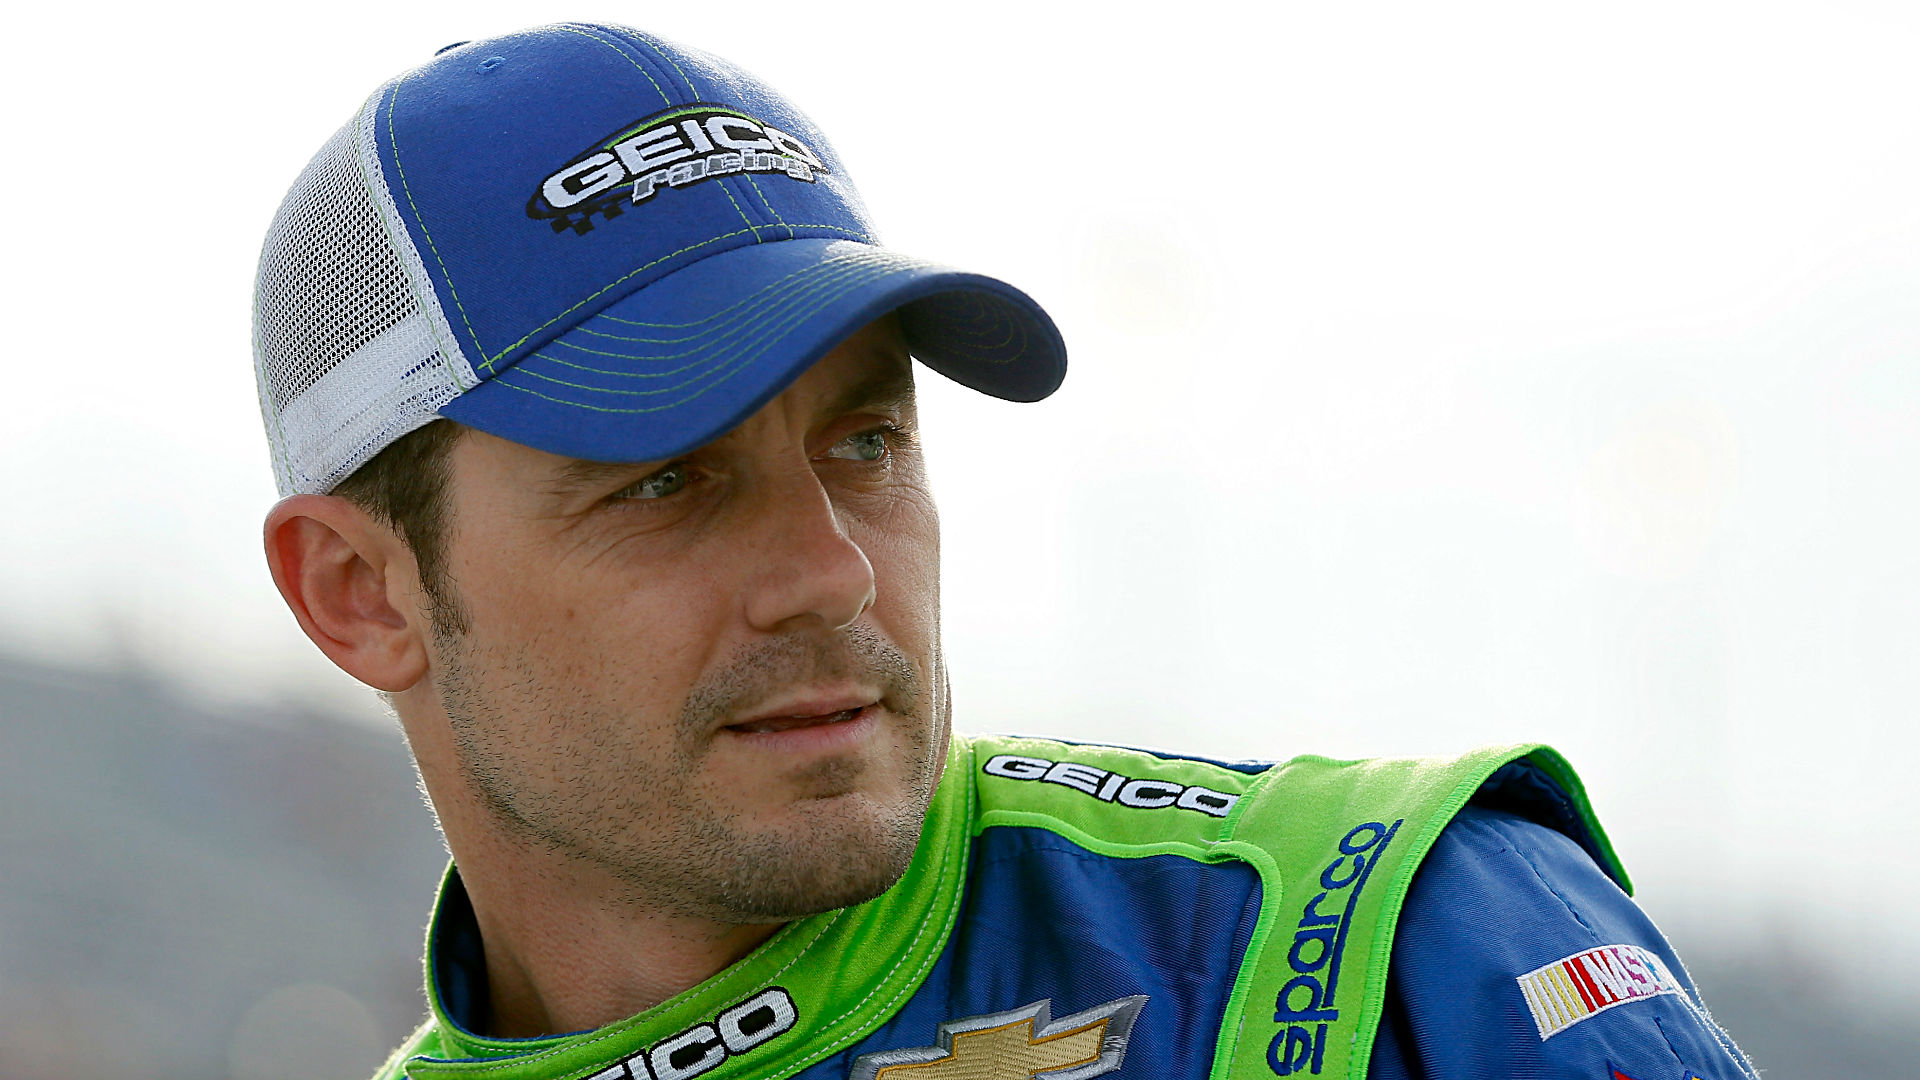 2019 Daytona 500: Casey Mears, 40, gets entry with Germain Racing